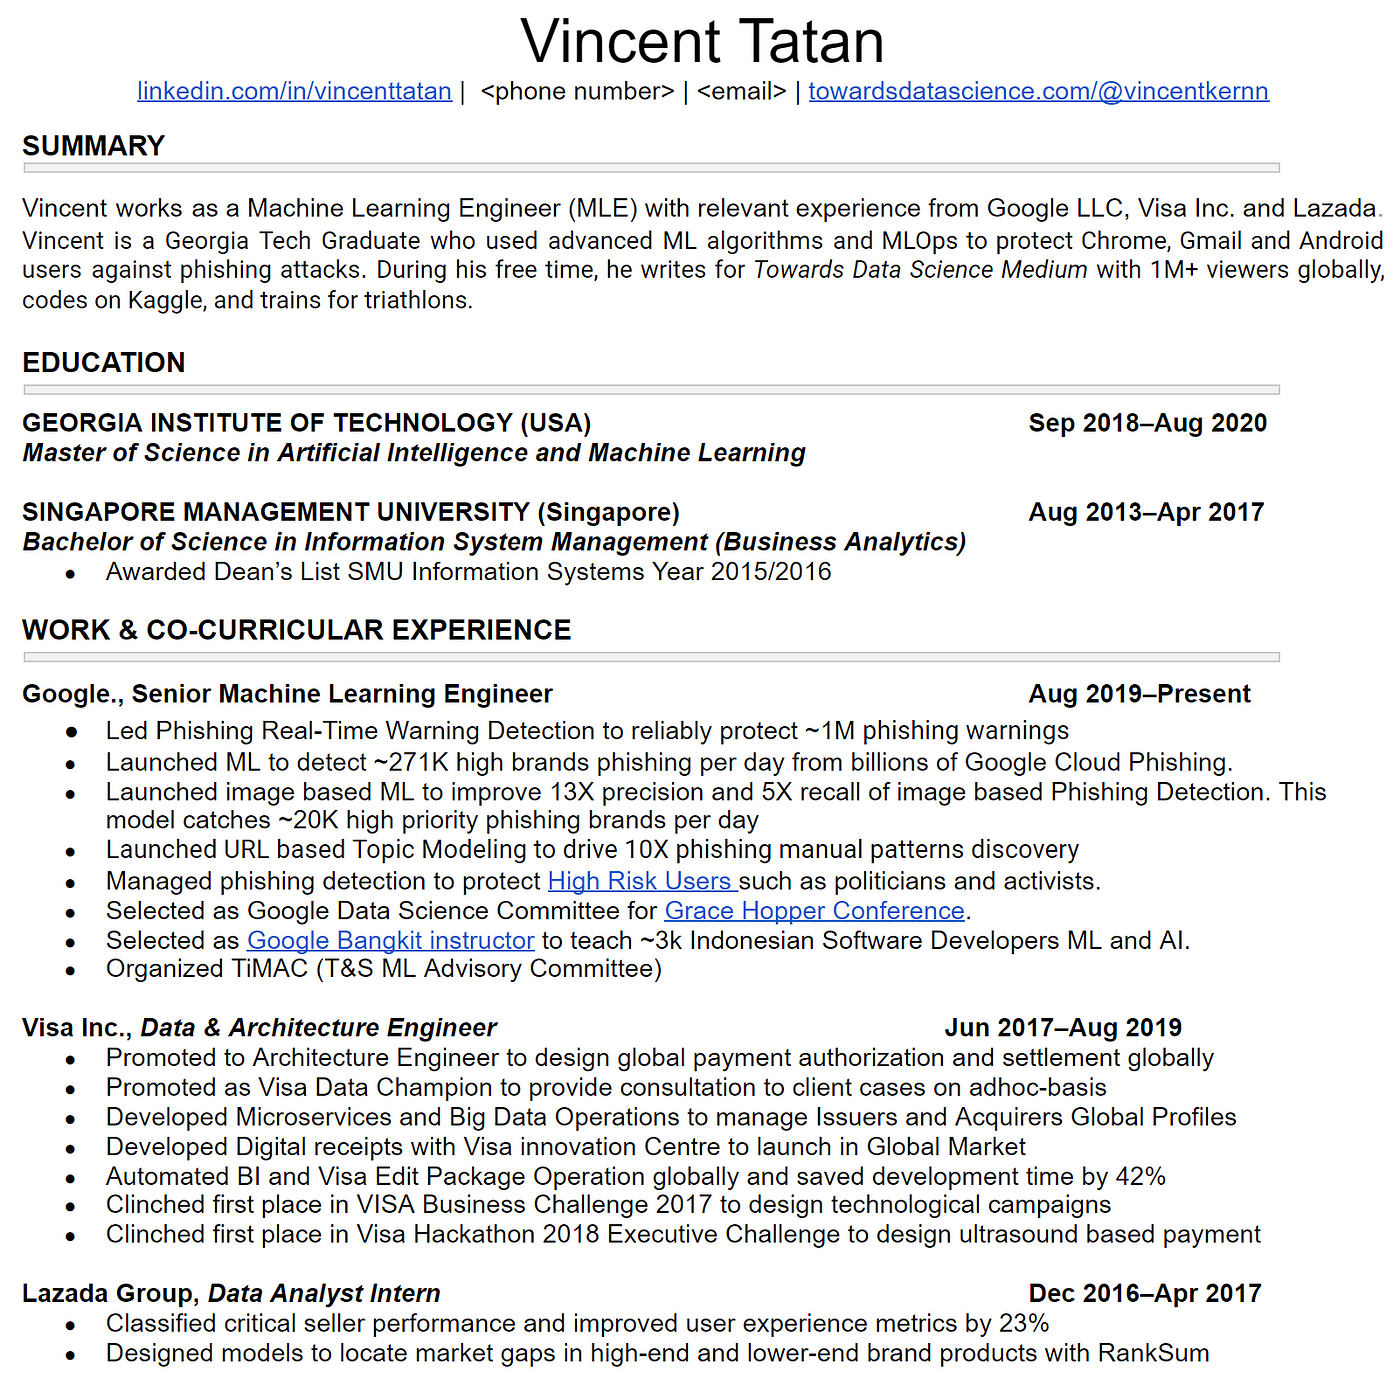 How to Build a Solid Data Science and Tech Resume | by Vincent Tatan |  Towards Data Science